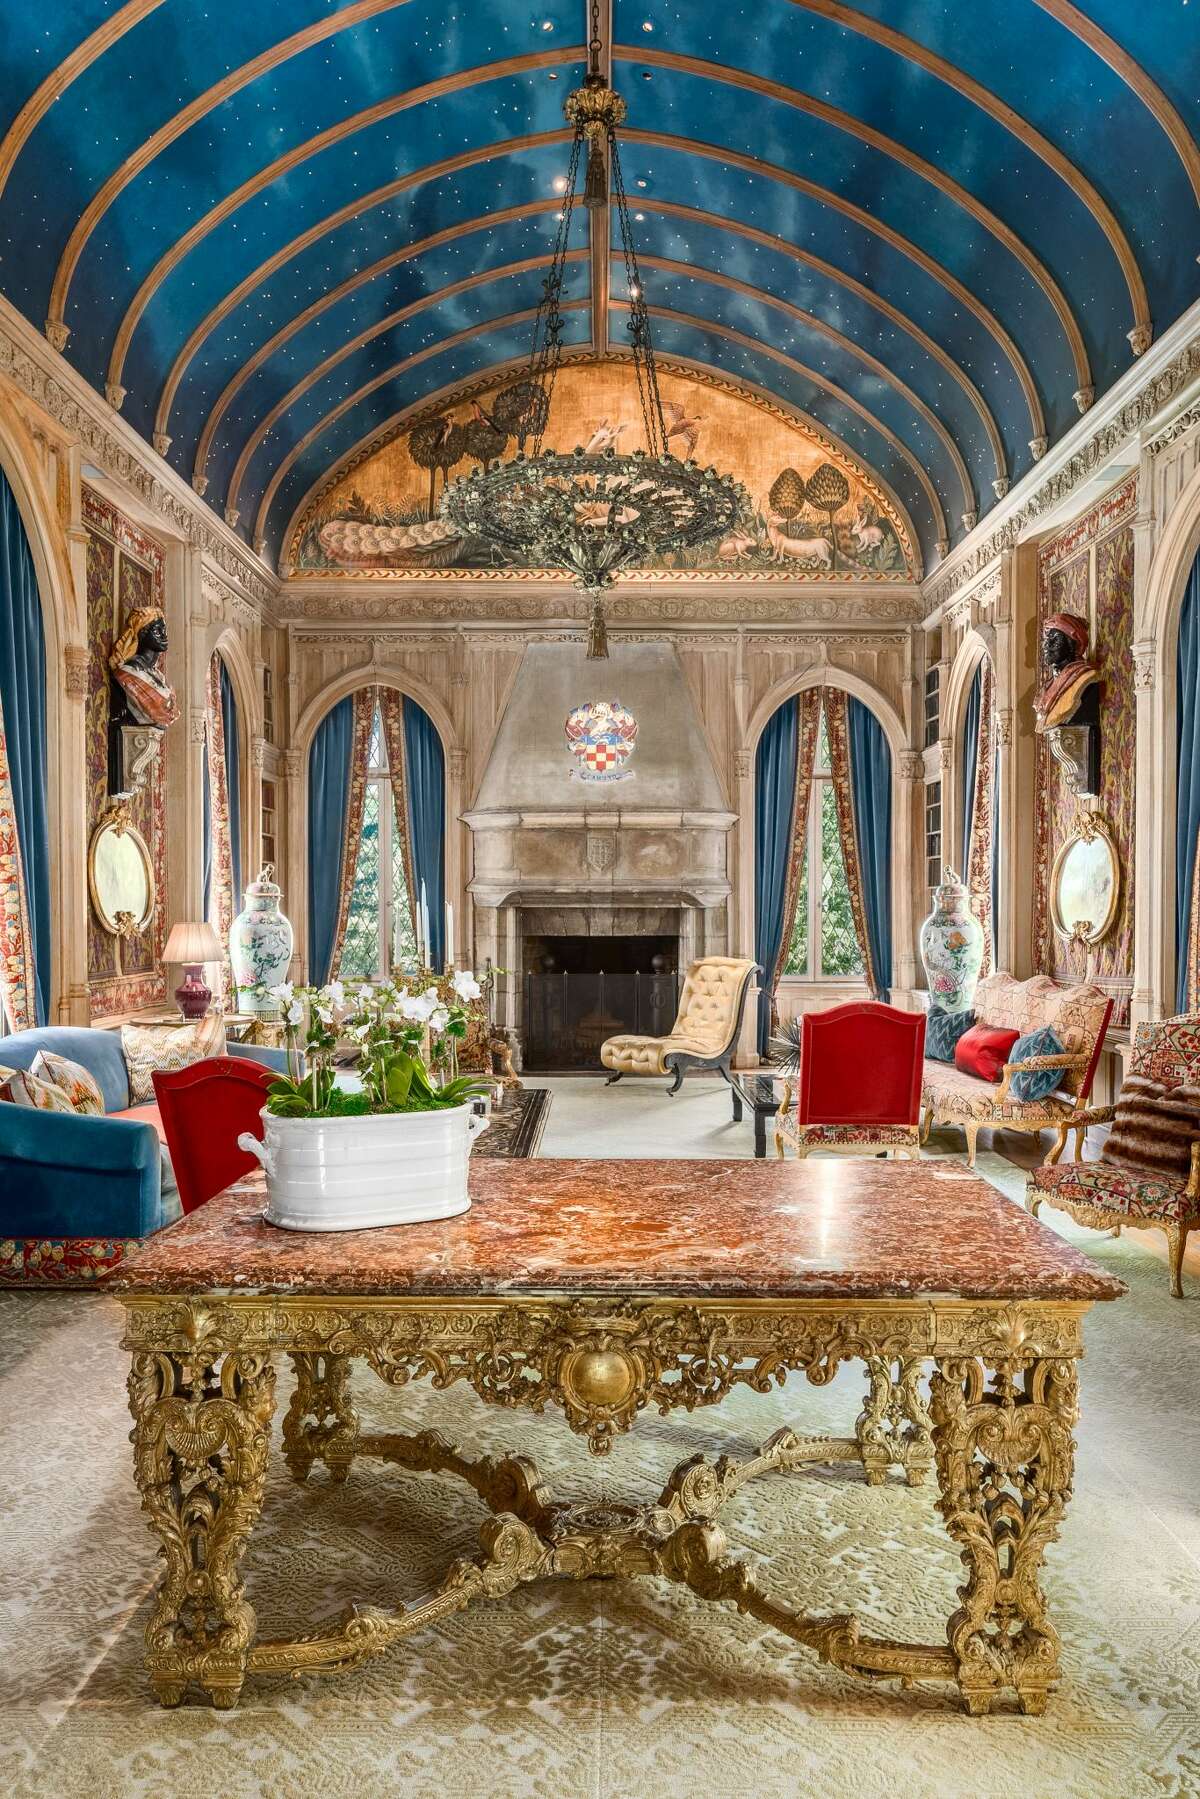 The Good Life: Vince and Louise Camuto's Connecticute Estate